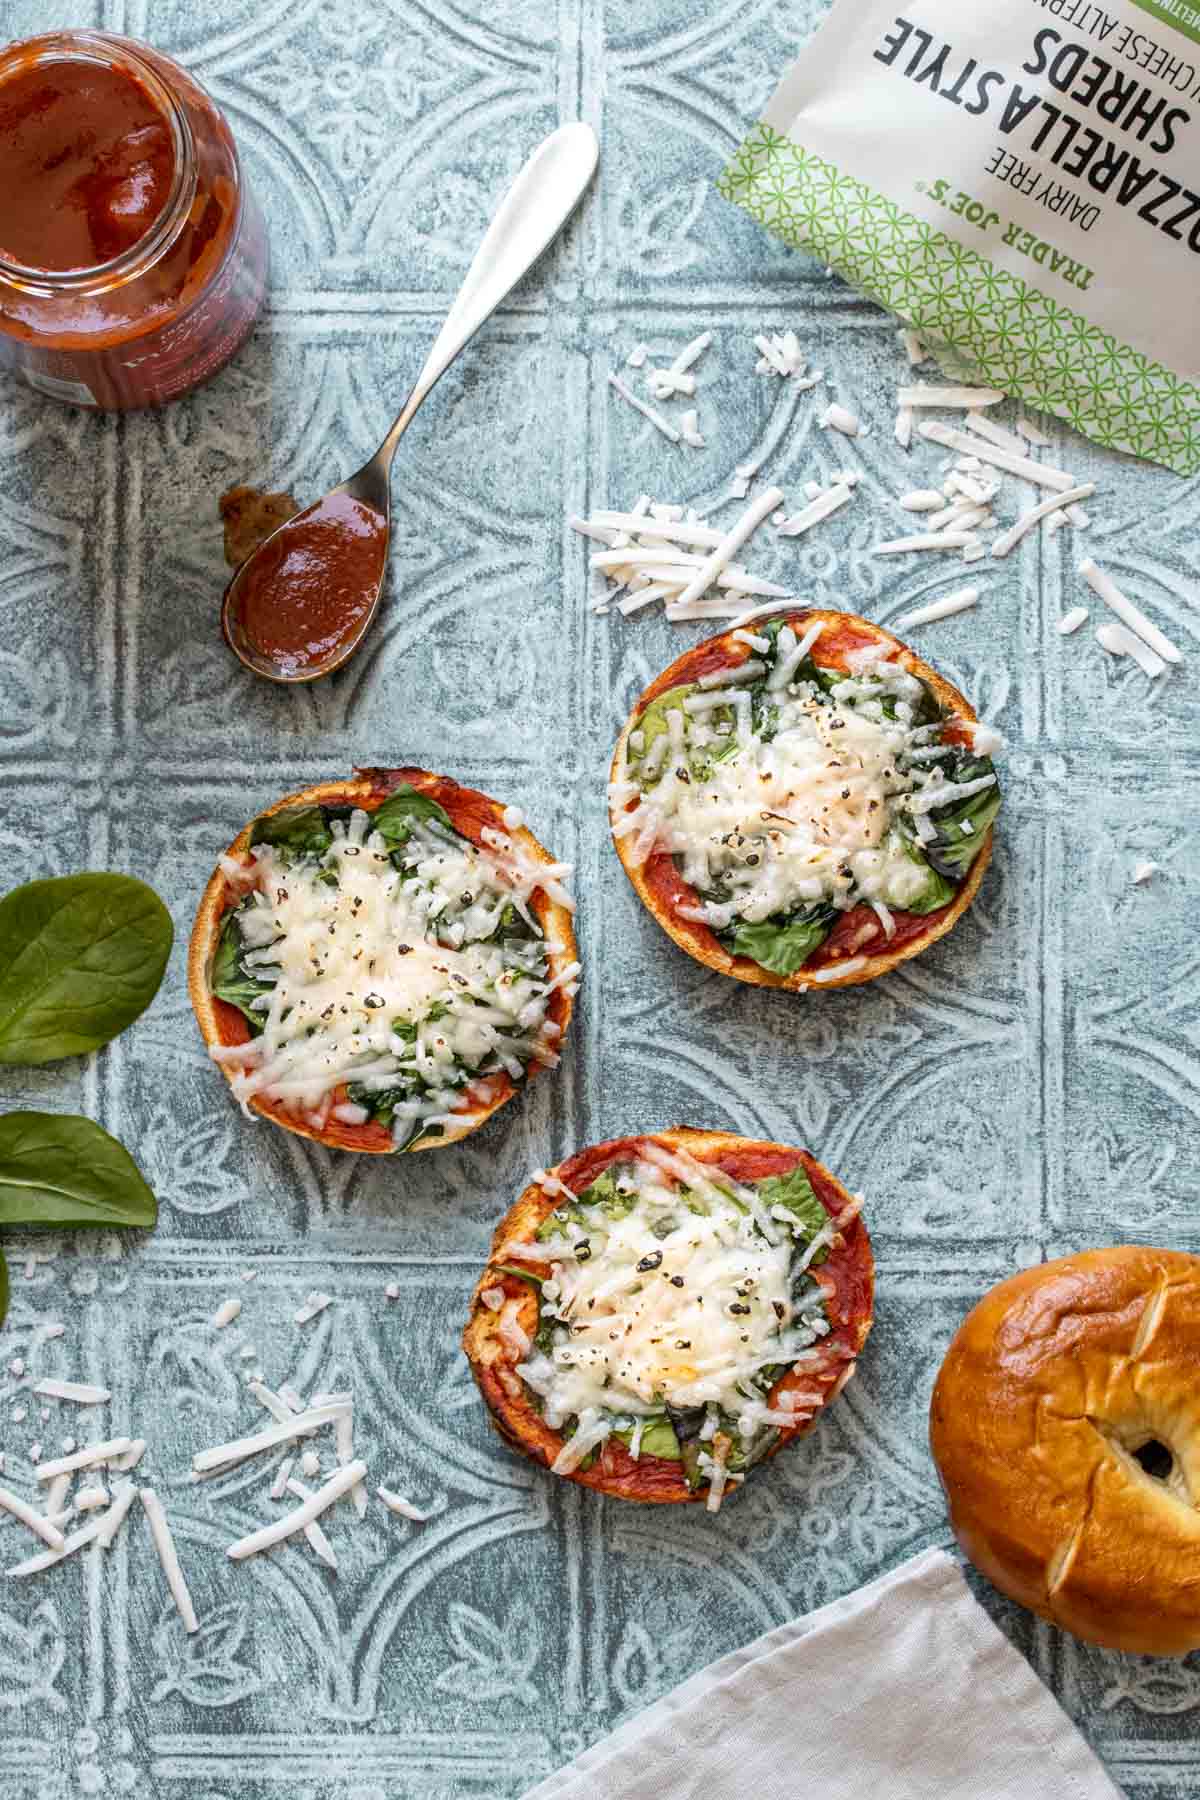 Bagels with pizza sauce, spinach and cheese that have been baked sitting on a blue tiled surface